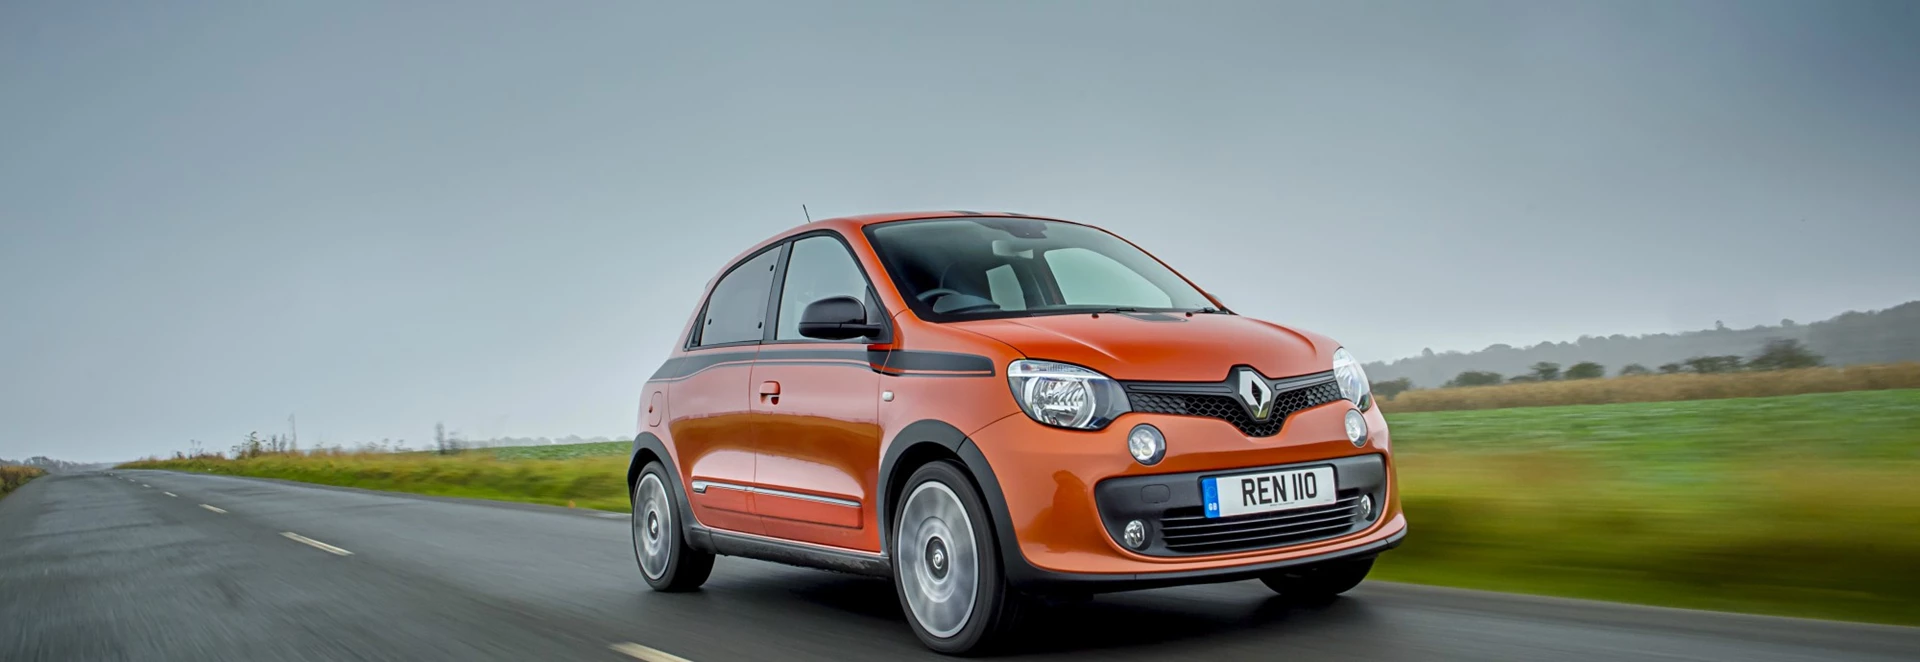 The Renault Twingo GT Is A Dinky Rear-Engine, RWD Bundle Of Fun